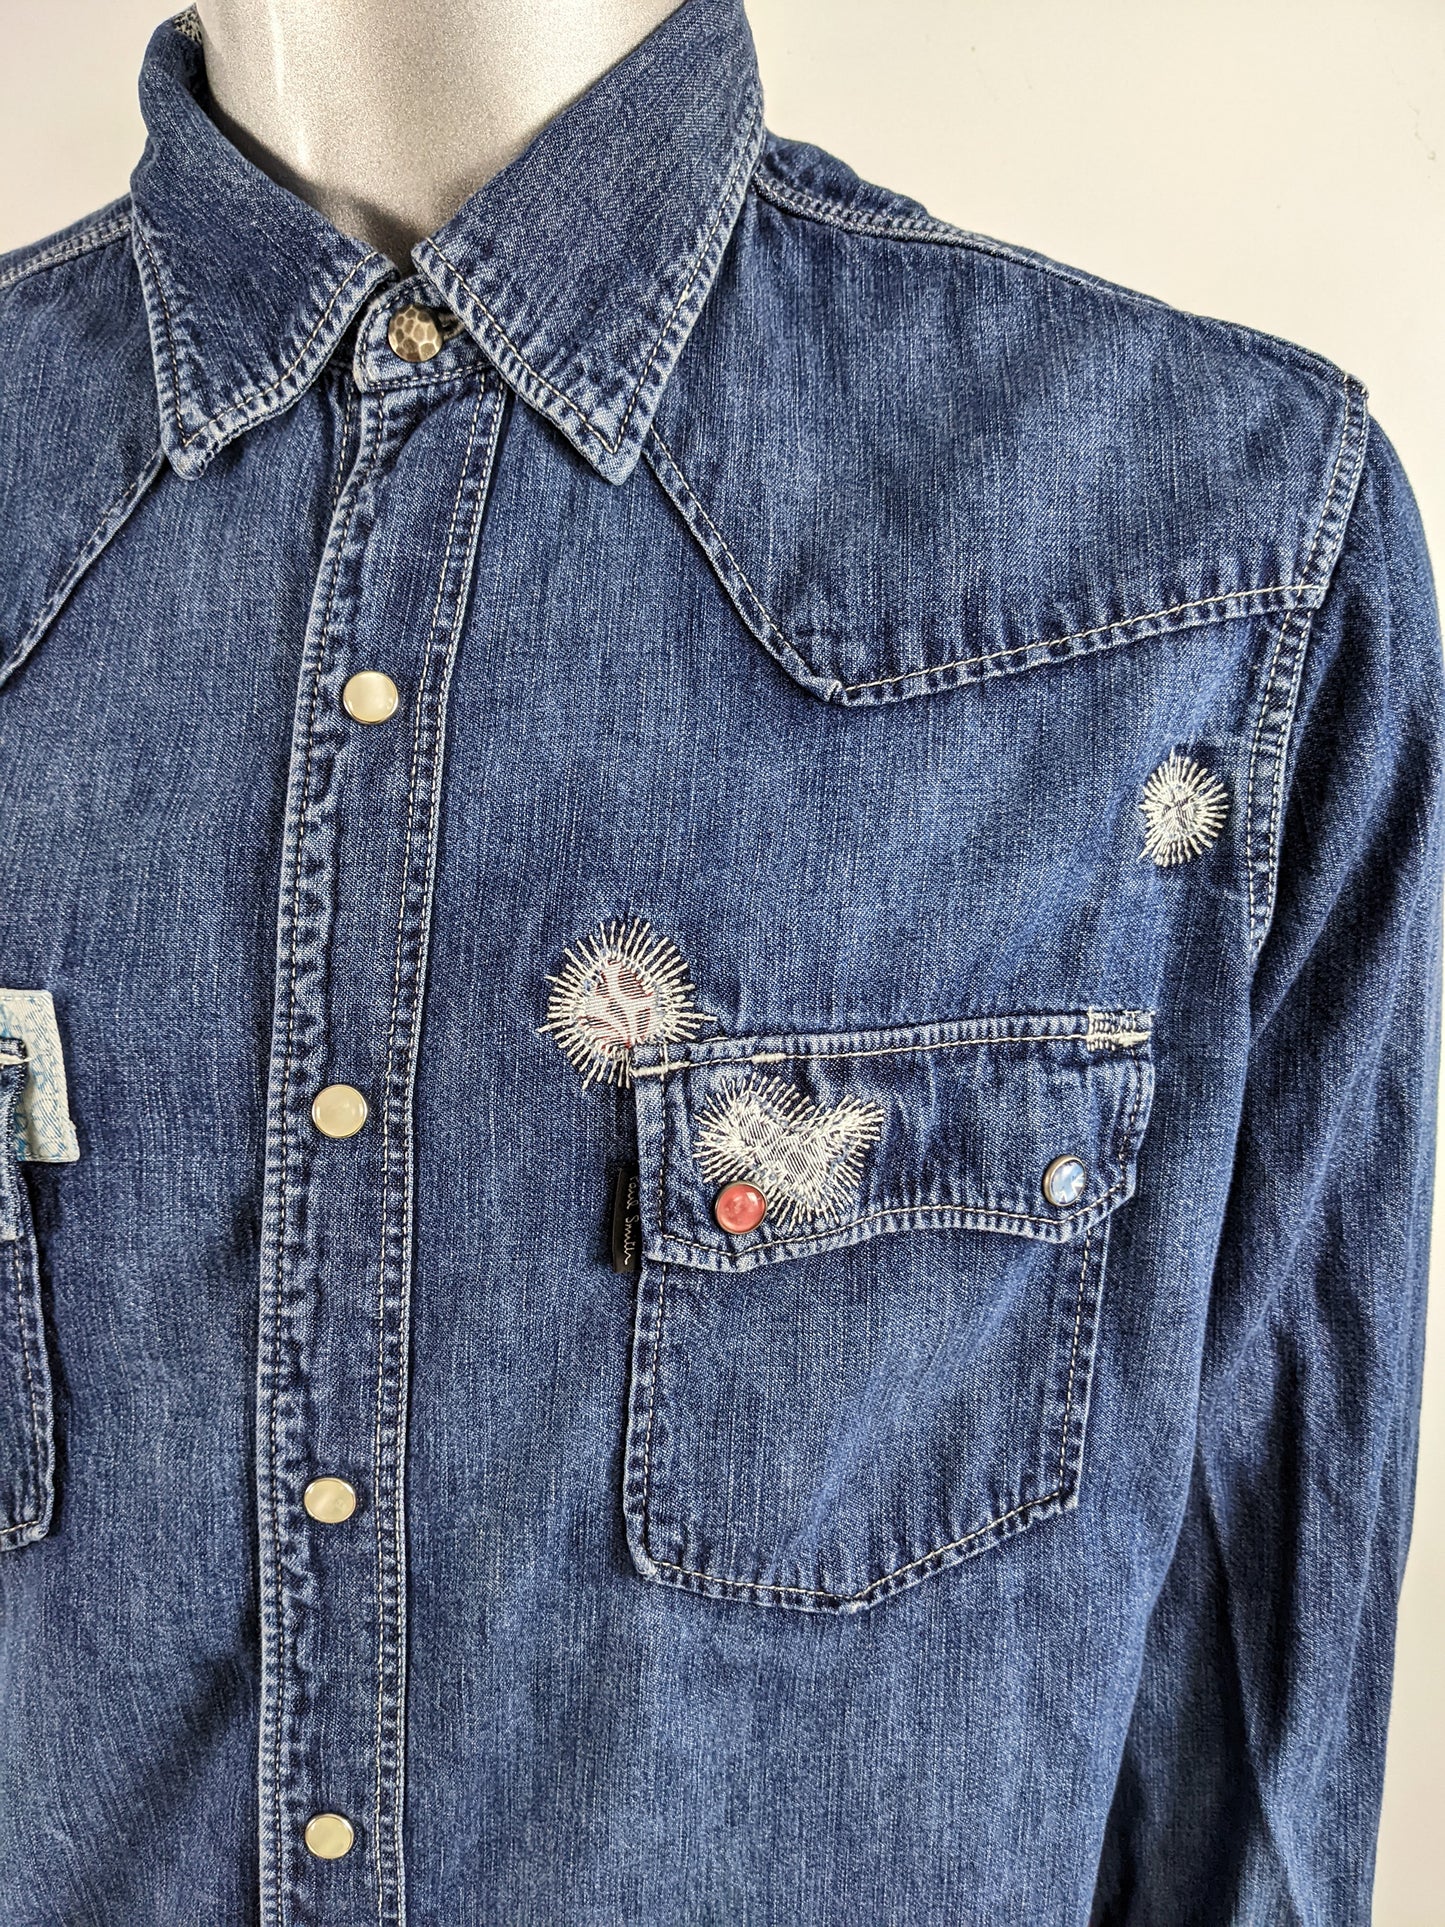 Red Ear by Paul Smith Vintage Mens Denim Shirt, 1990s